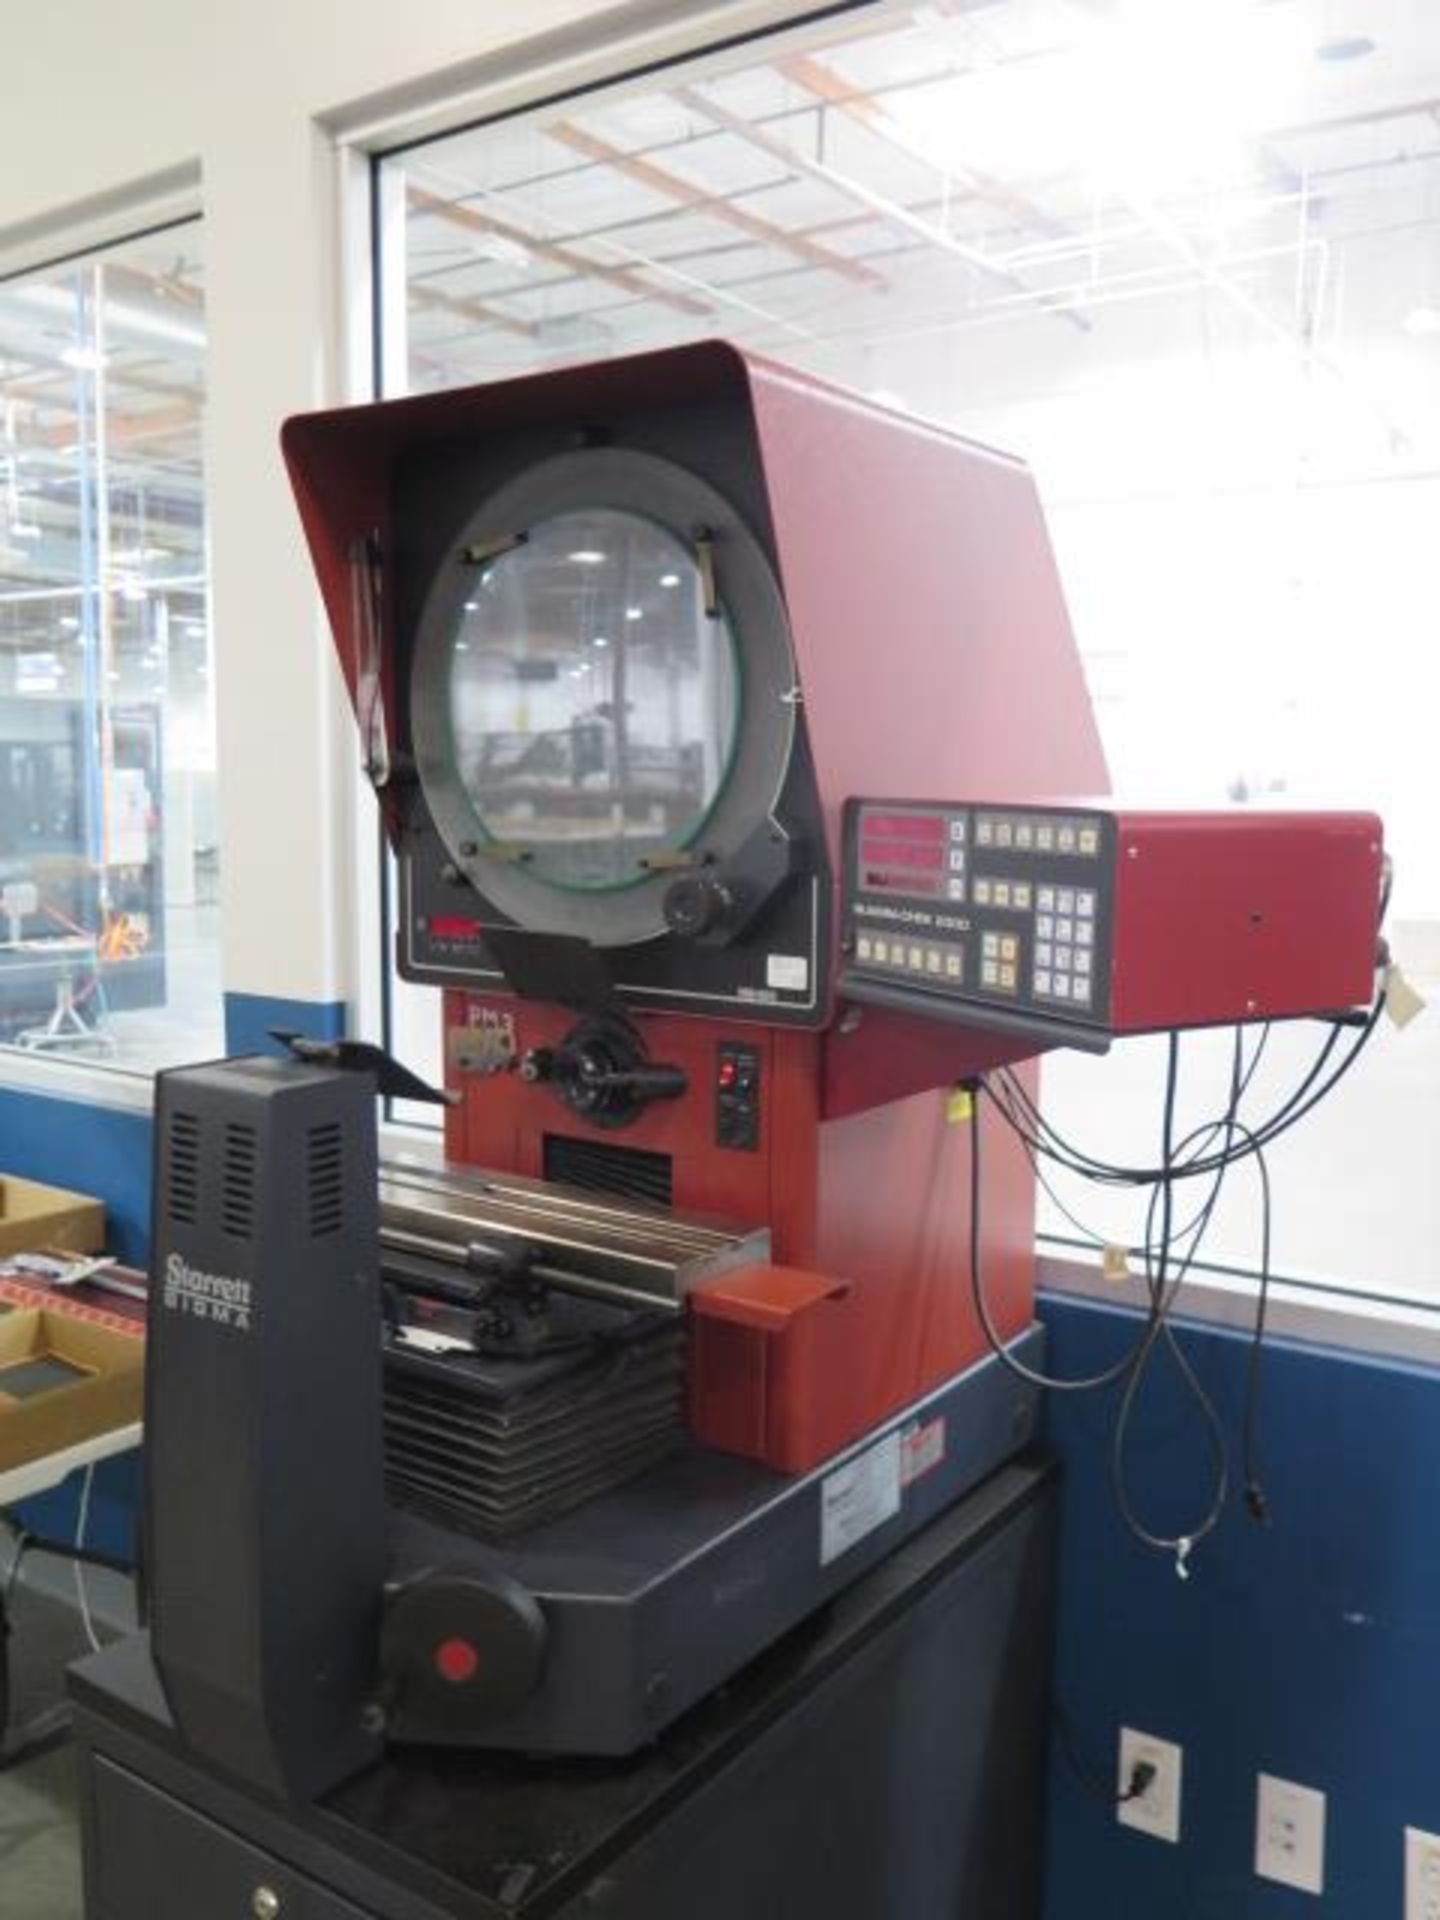 Starrett HB400 15” Optical Comparator s/n 5484 w/ Quadra-Chek 2000 Programmable DRO, SOLD AS IS - Image 3 of 11